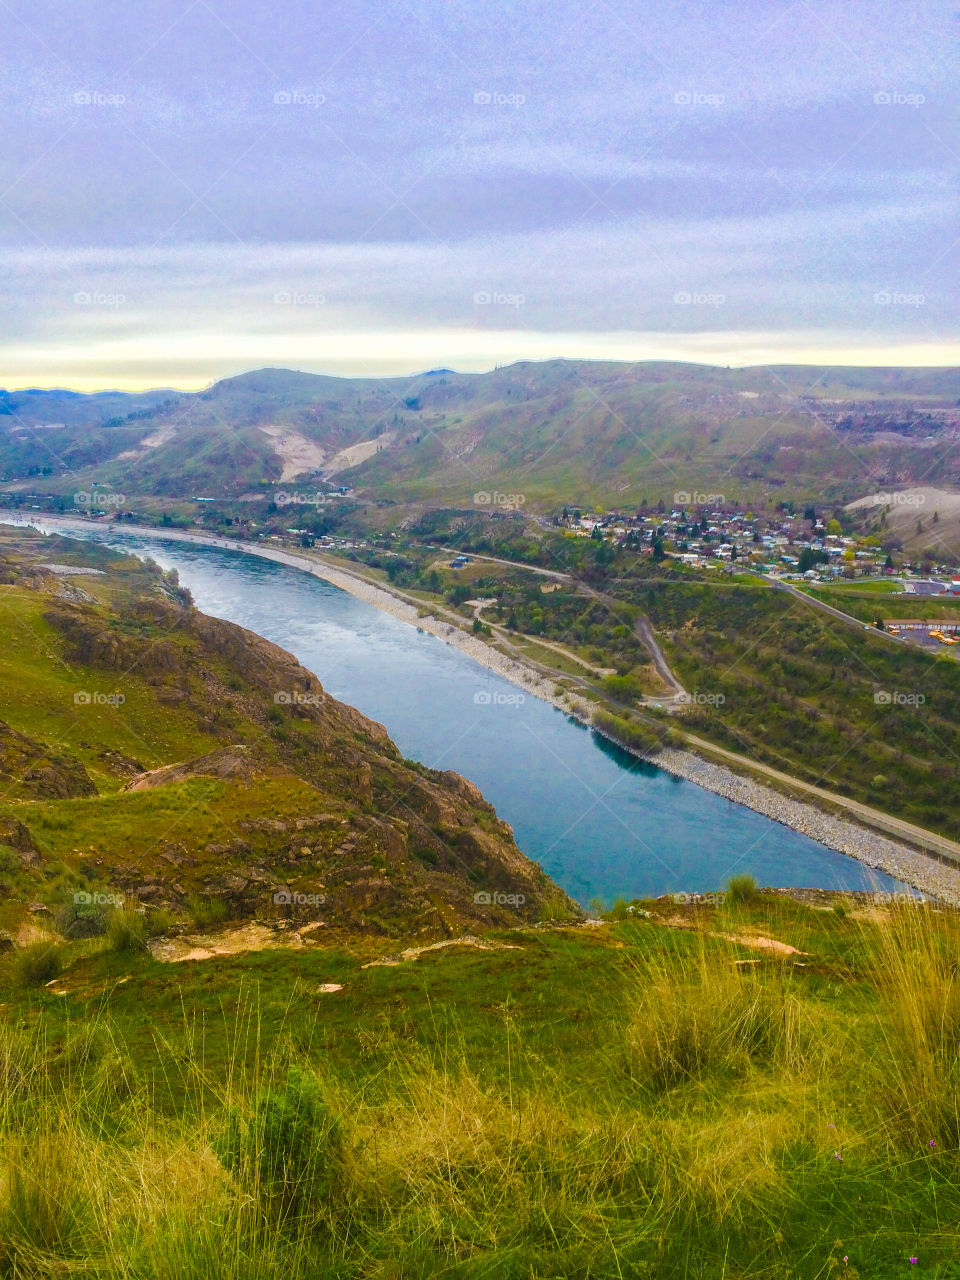 Vibrant landscape of the Columbia river with rural town below 